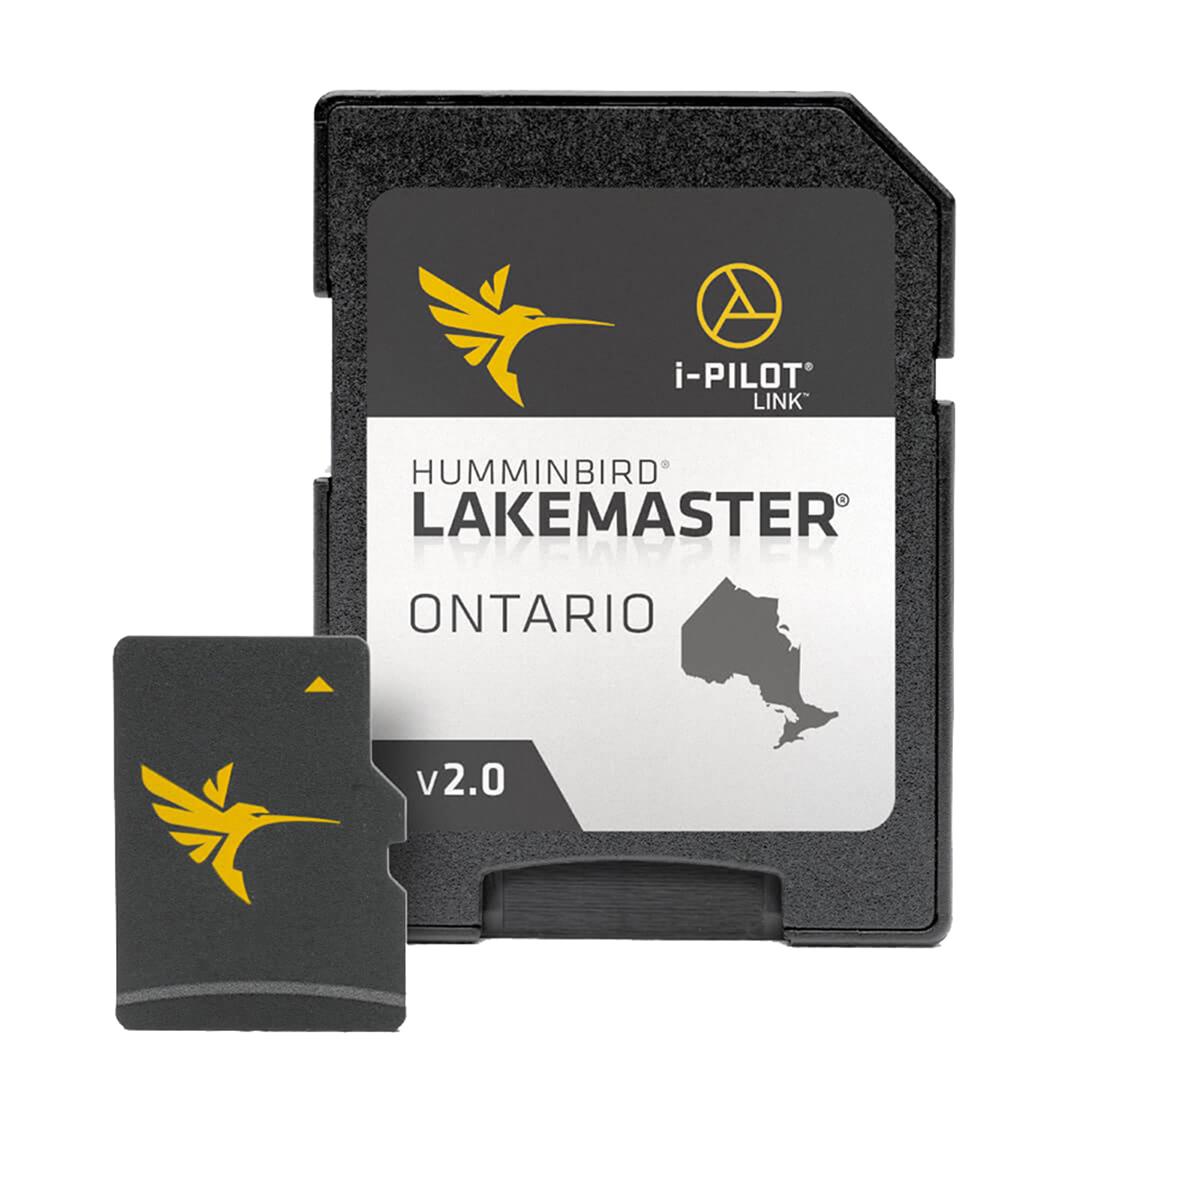 Picture of Humminbird 600053-2 Version 2 LakeMaster Chart for Ontario with Woods & Rainy Lakes